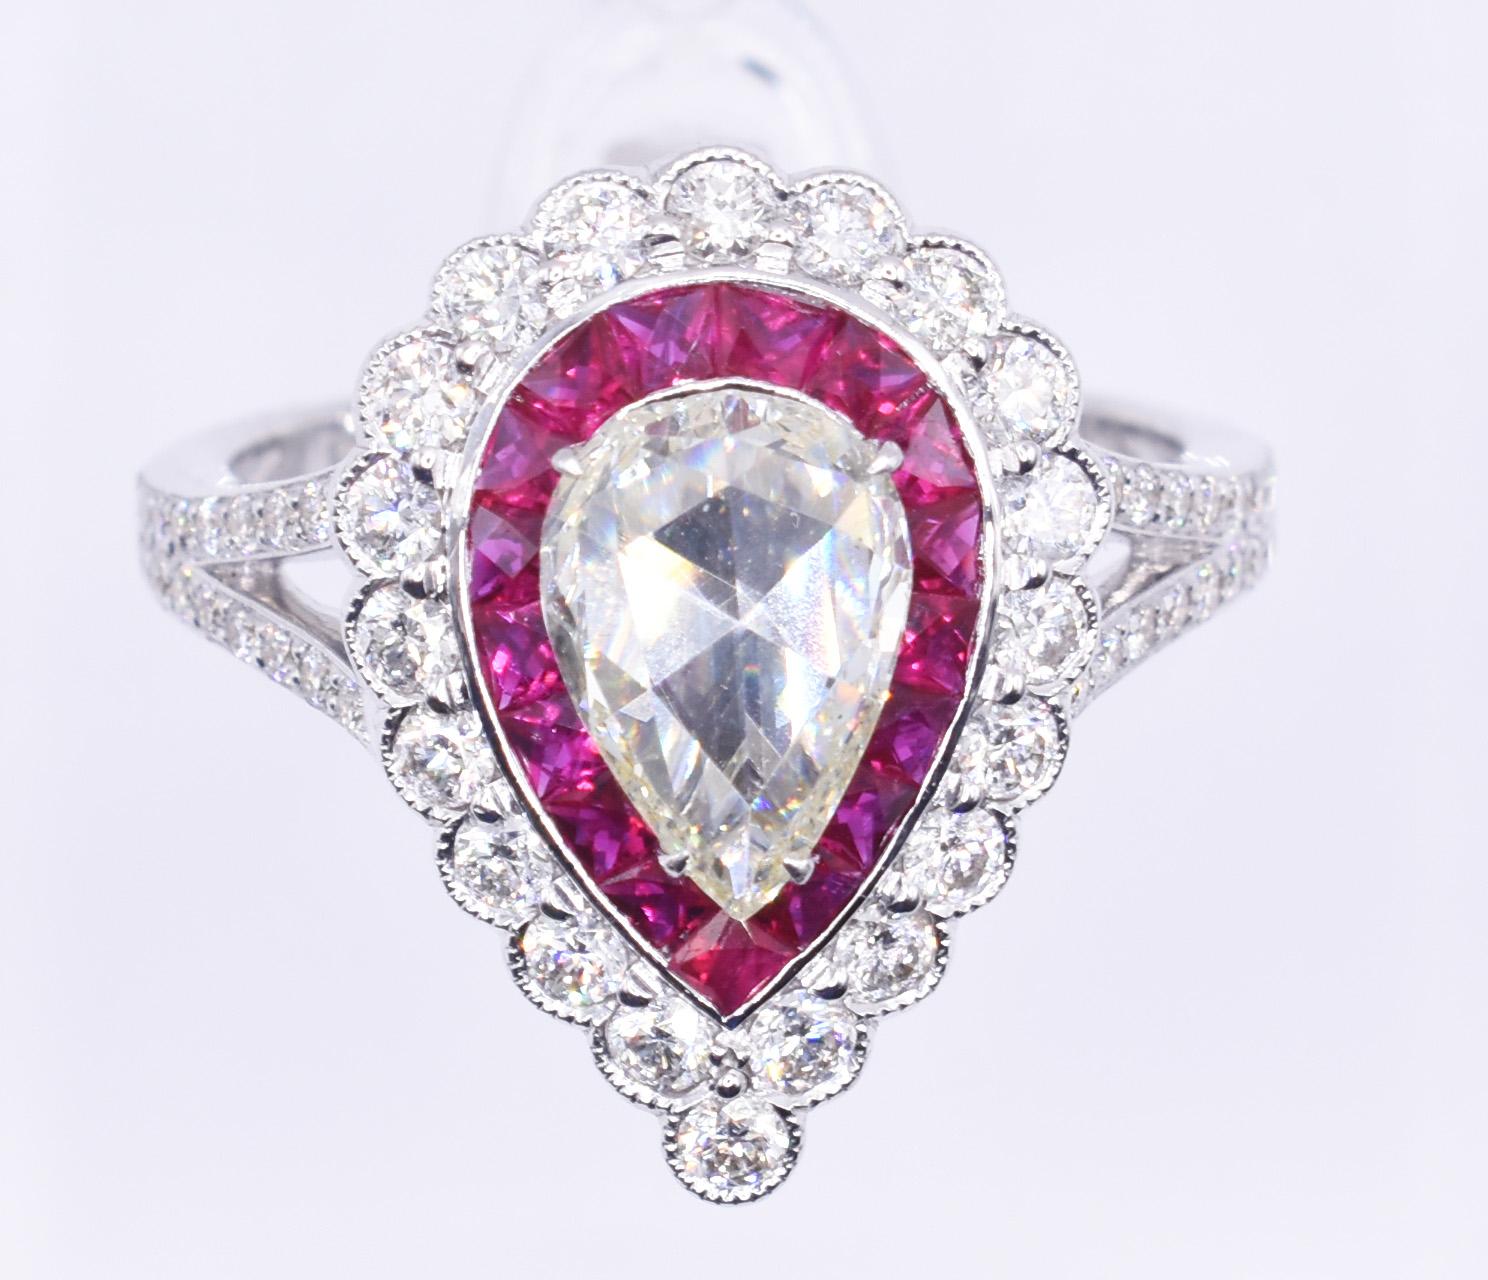 For sale is a fine quality 18k white gold diamond and ruby ring, having a 1.17ct rose cut pear shaped diamond to the centre, surrounded by French cut Burmese rubies, totaling 1.20ct, with a halo of round cut miligrain set diamonds to the edge, with